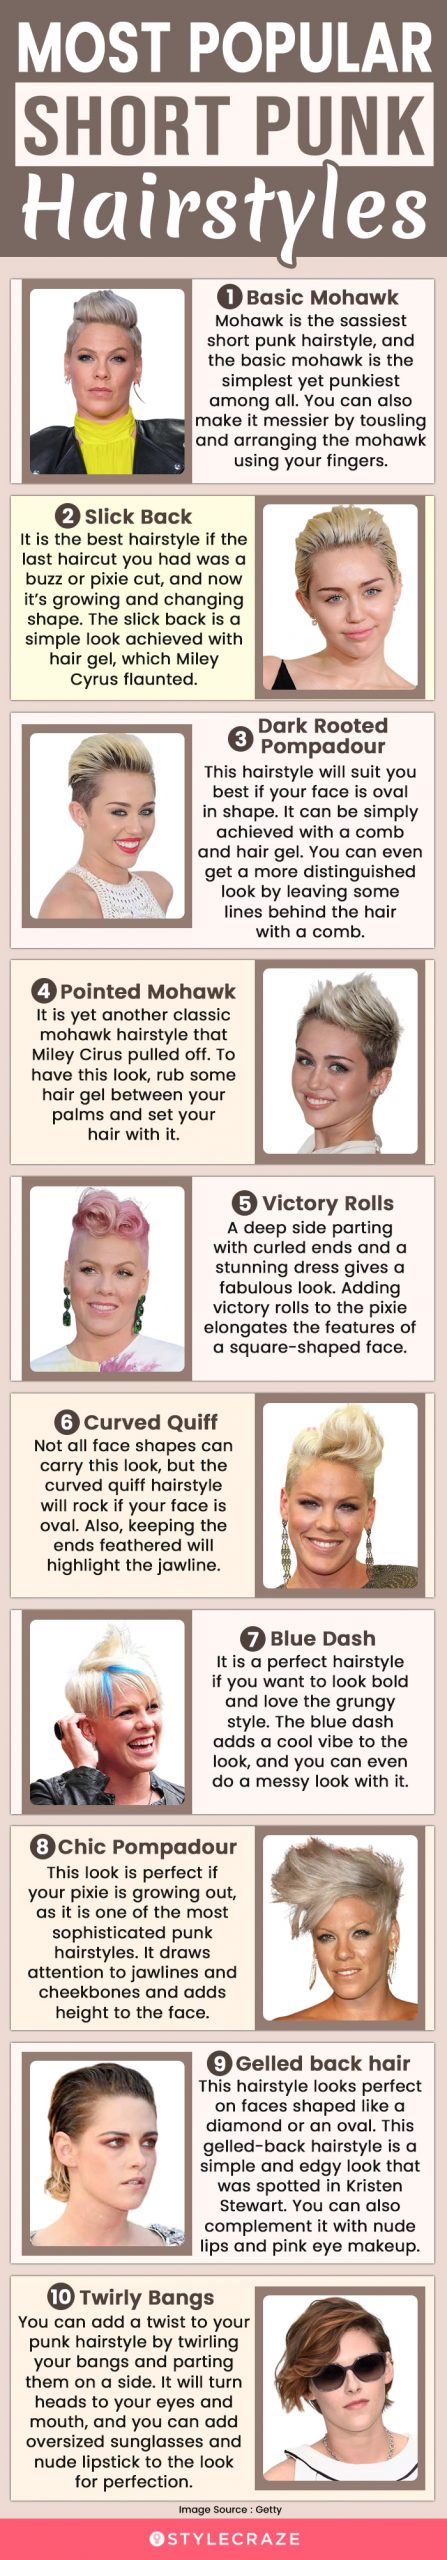 most popular short punk hairstyles (infographic)